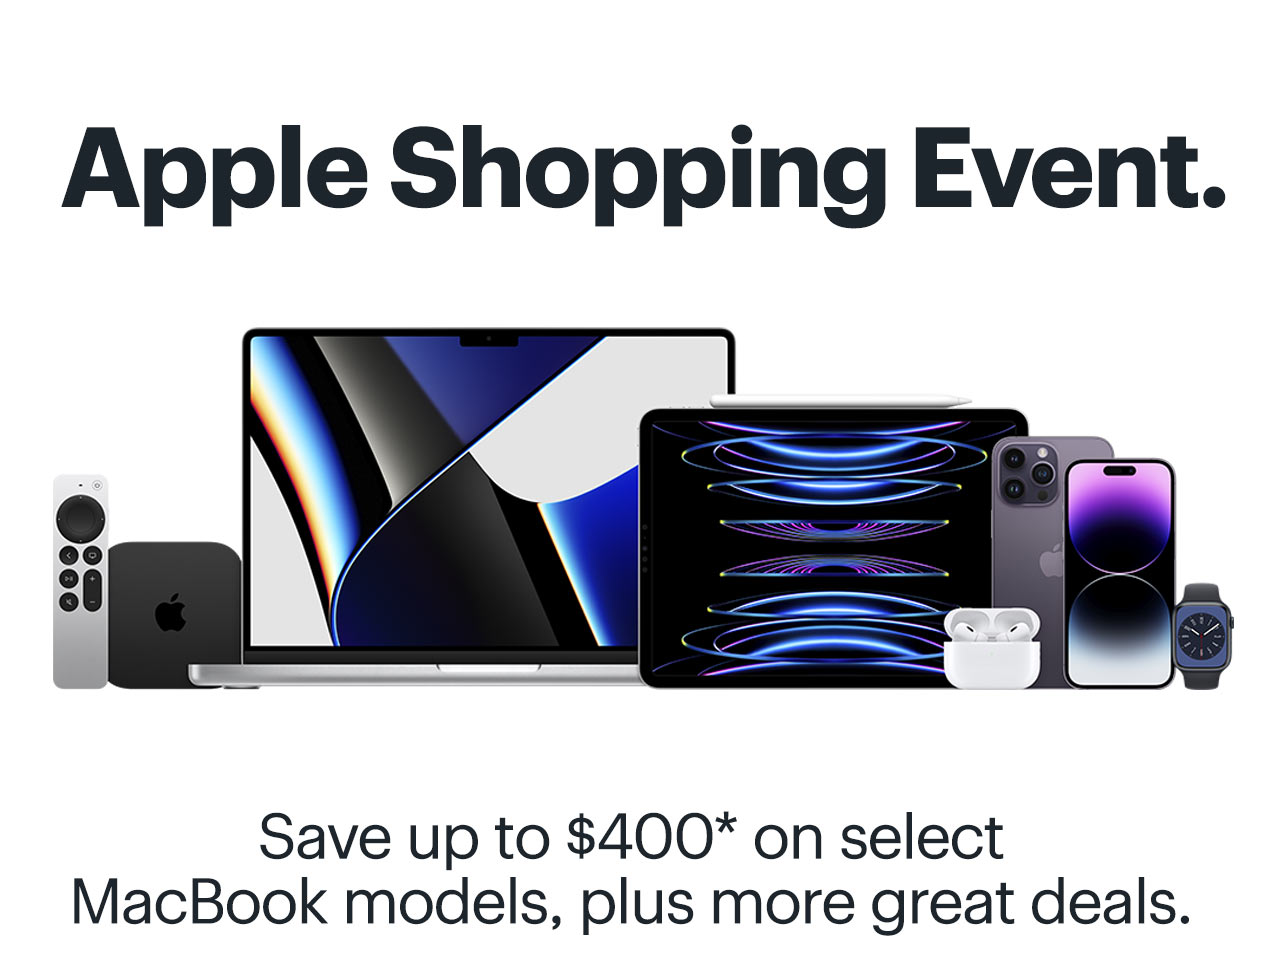 Apple Shopping Event. Save up to $400 on select MacBook models, plus more great deals. Reference disclaimer.